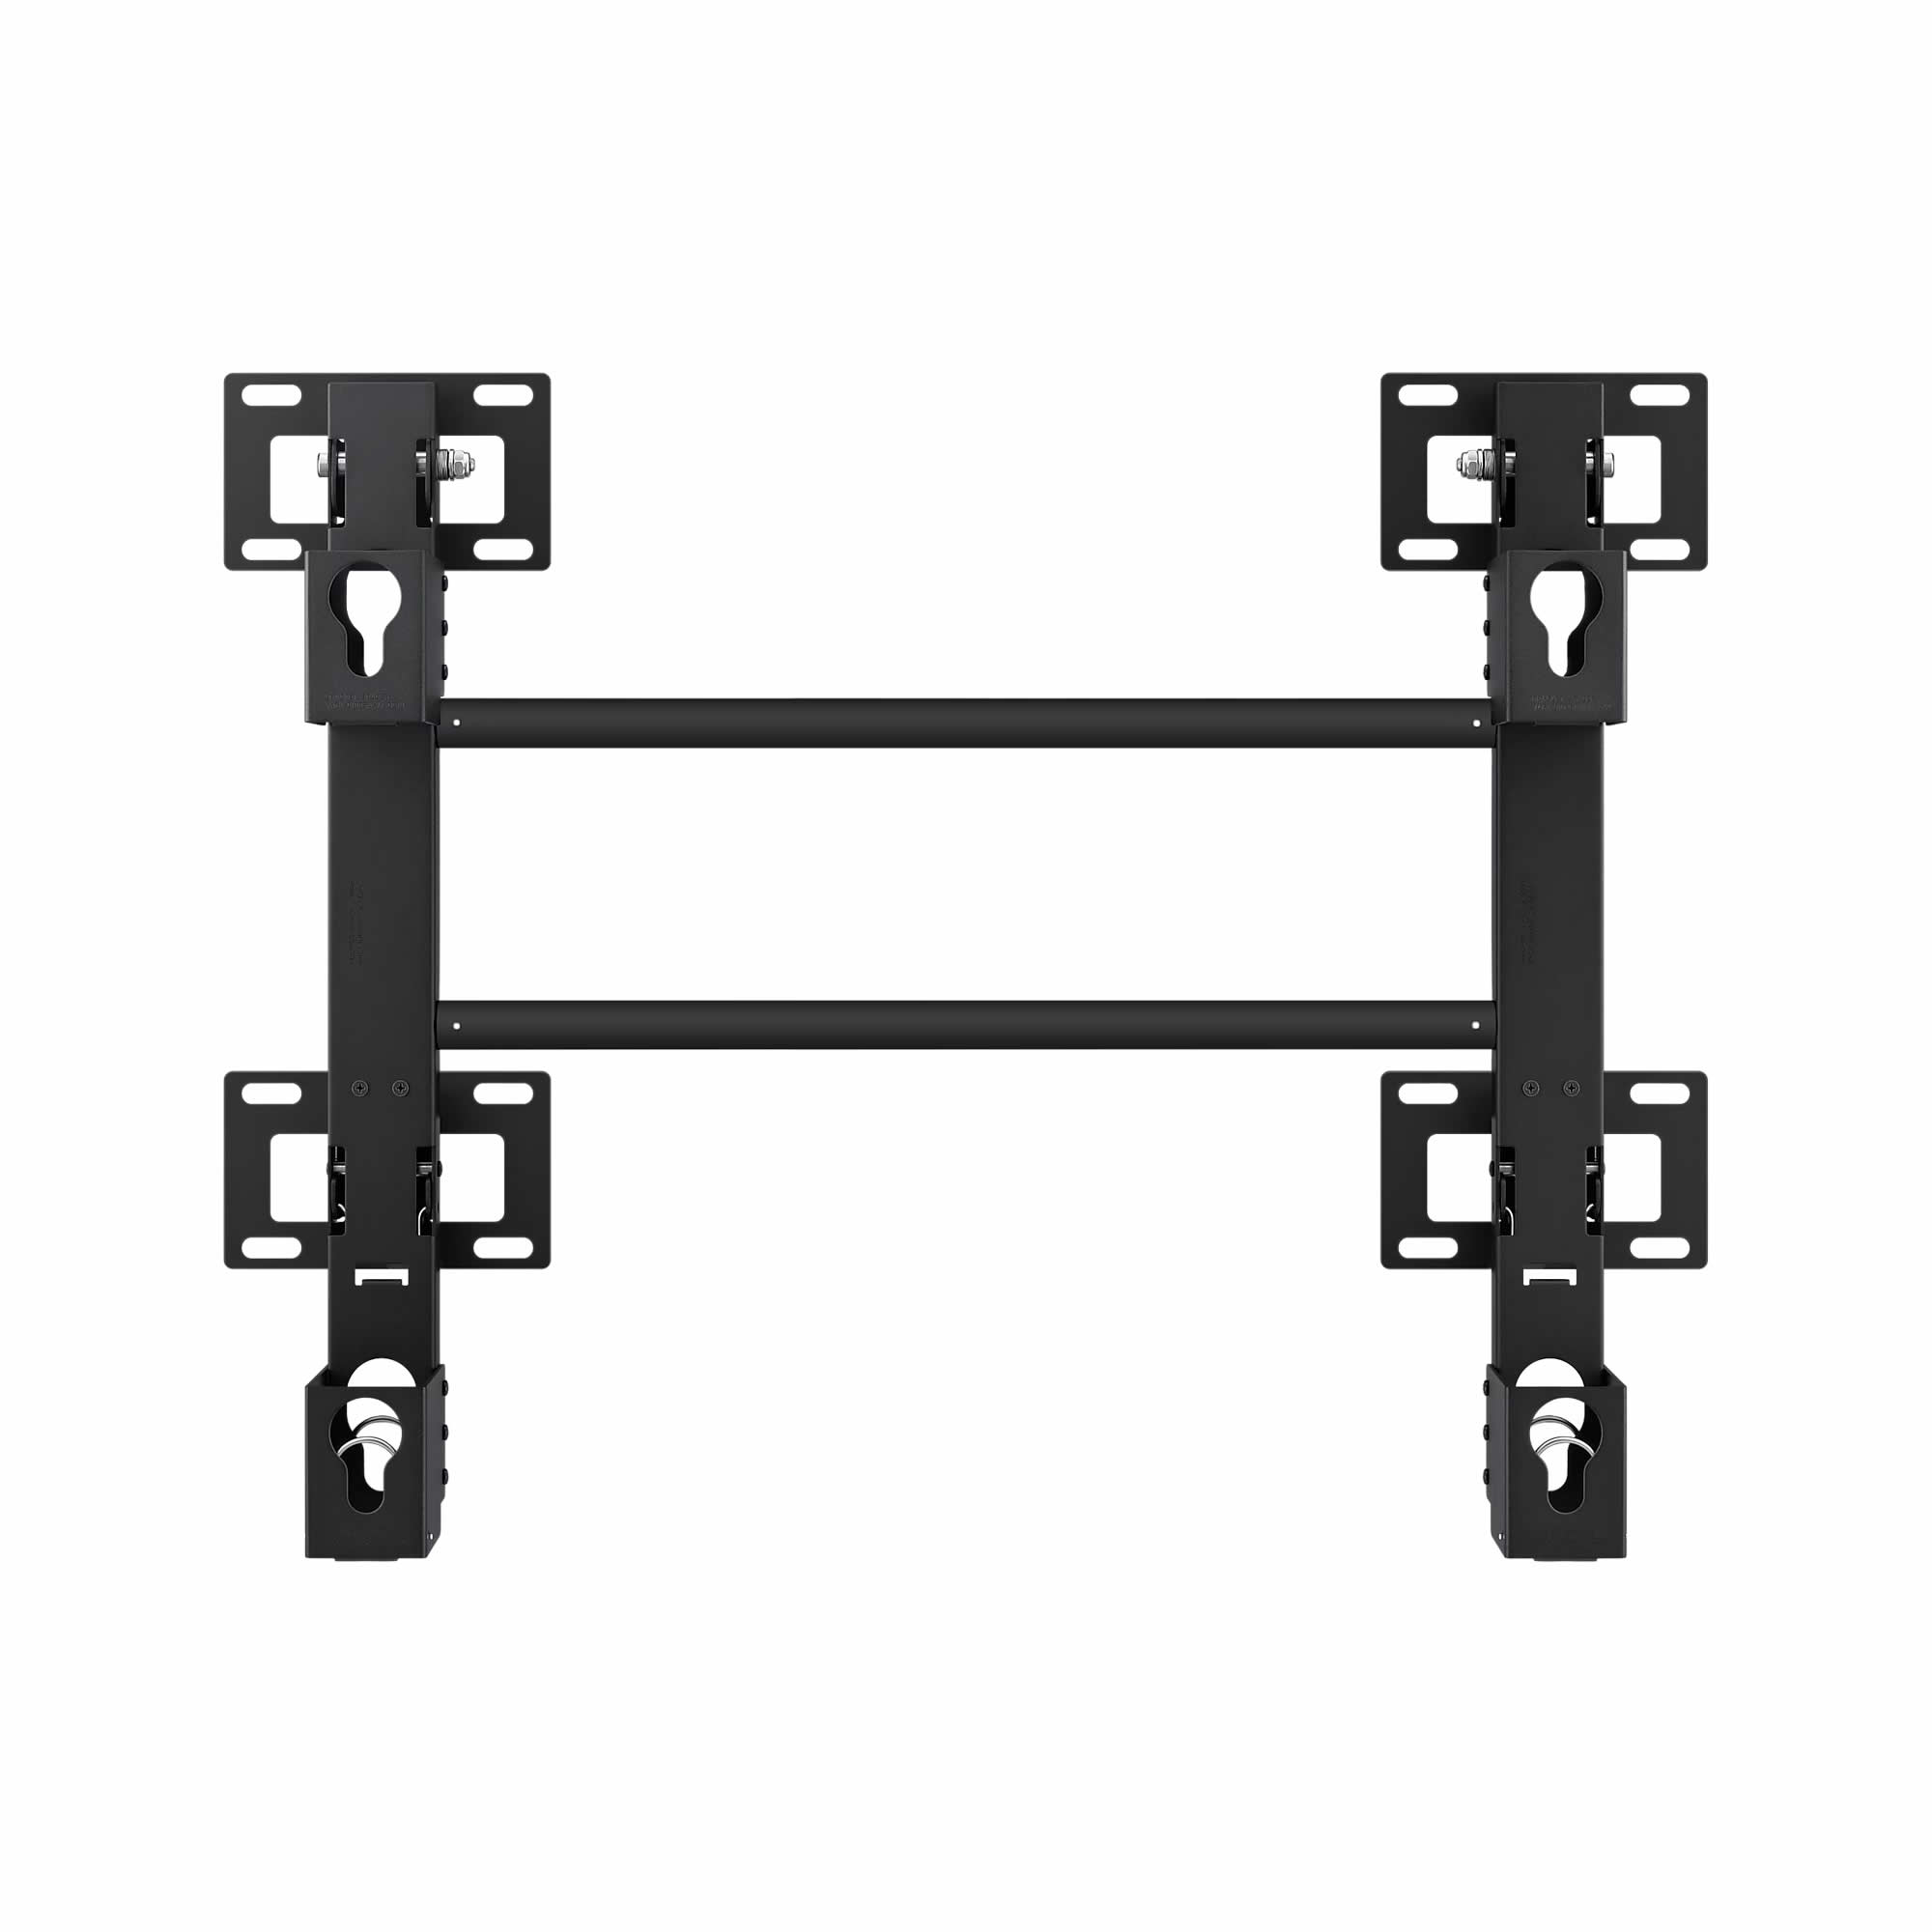 Samsung Large Wall Bracket for 76inch Plus TVs